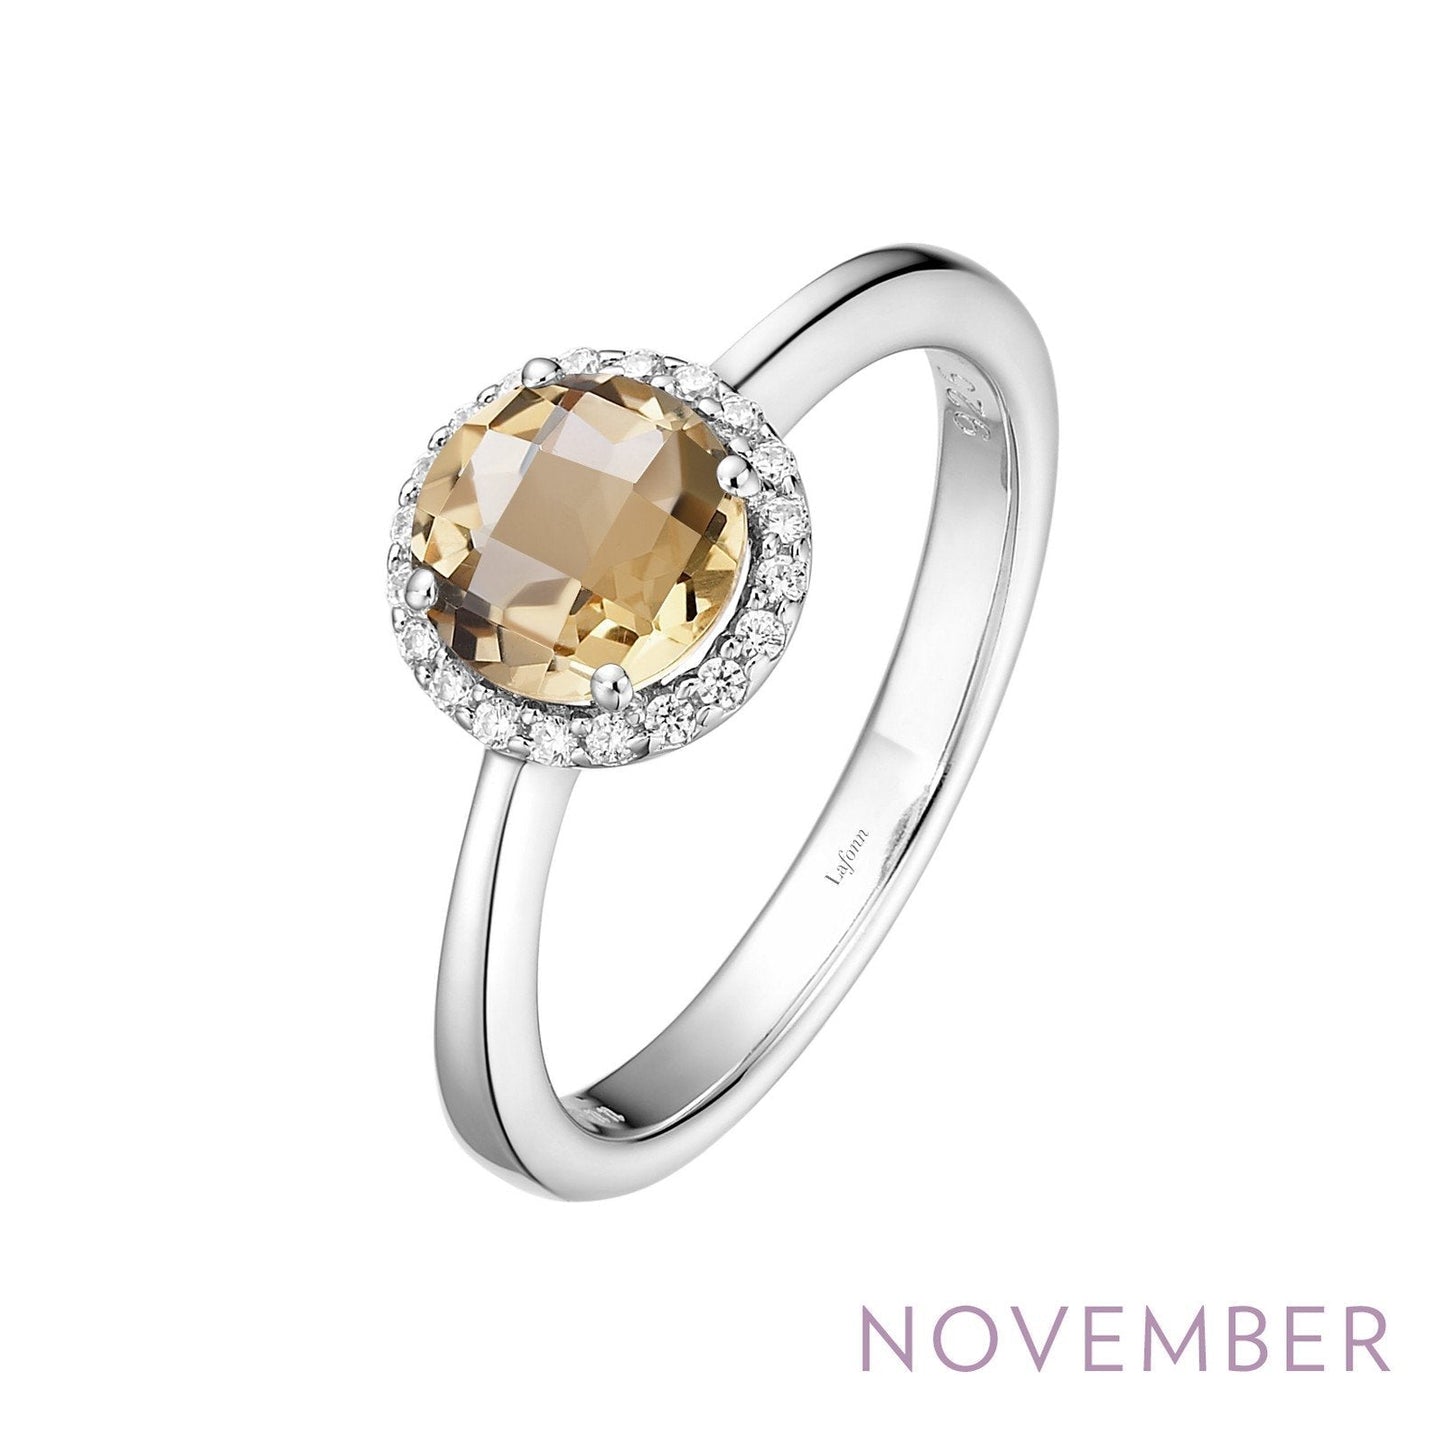 Lafonn November Birthstone Ring NOVEMBER RINGS Size 6 Platinum Appx CTW: 1.05 cts. Citrine Appx 0.85 cts.  Lassaire simulated diamonds: 0.20 cts. CTS 